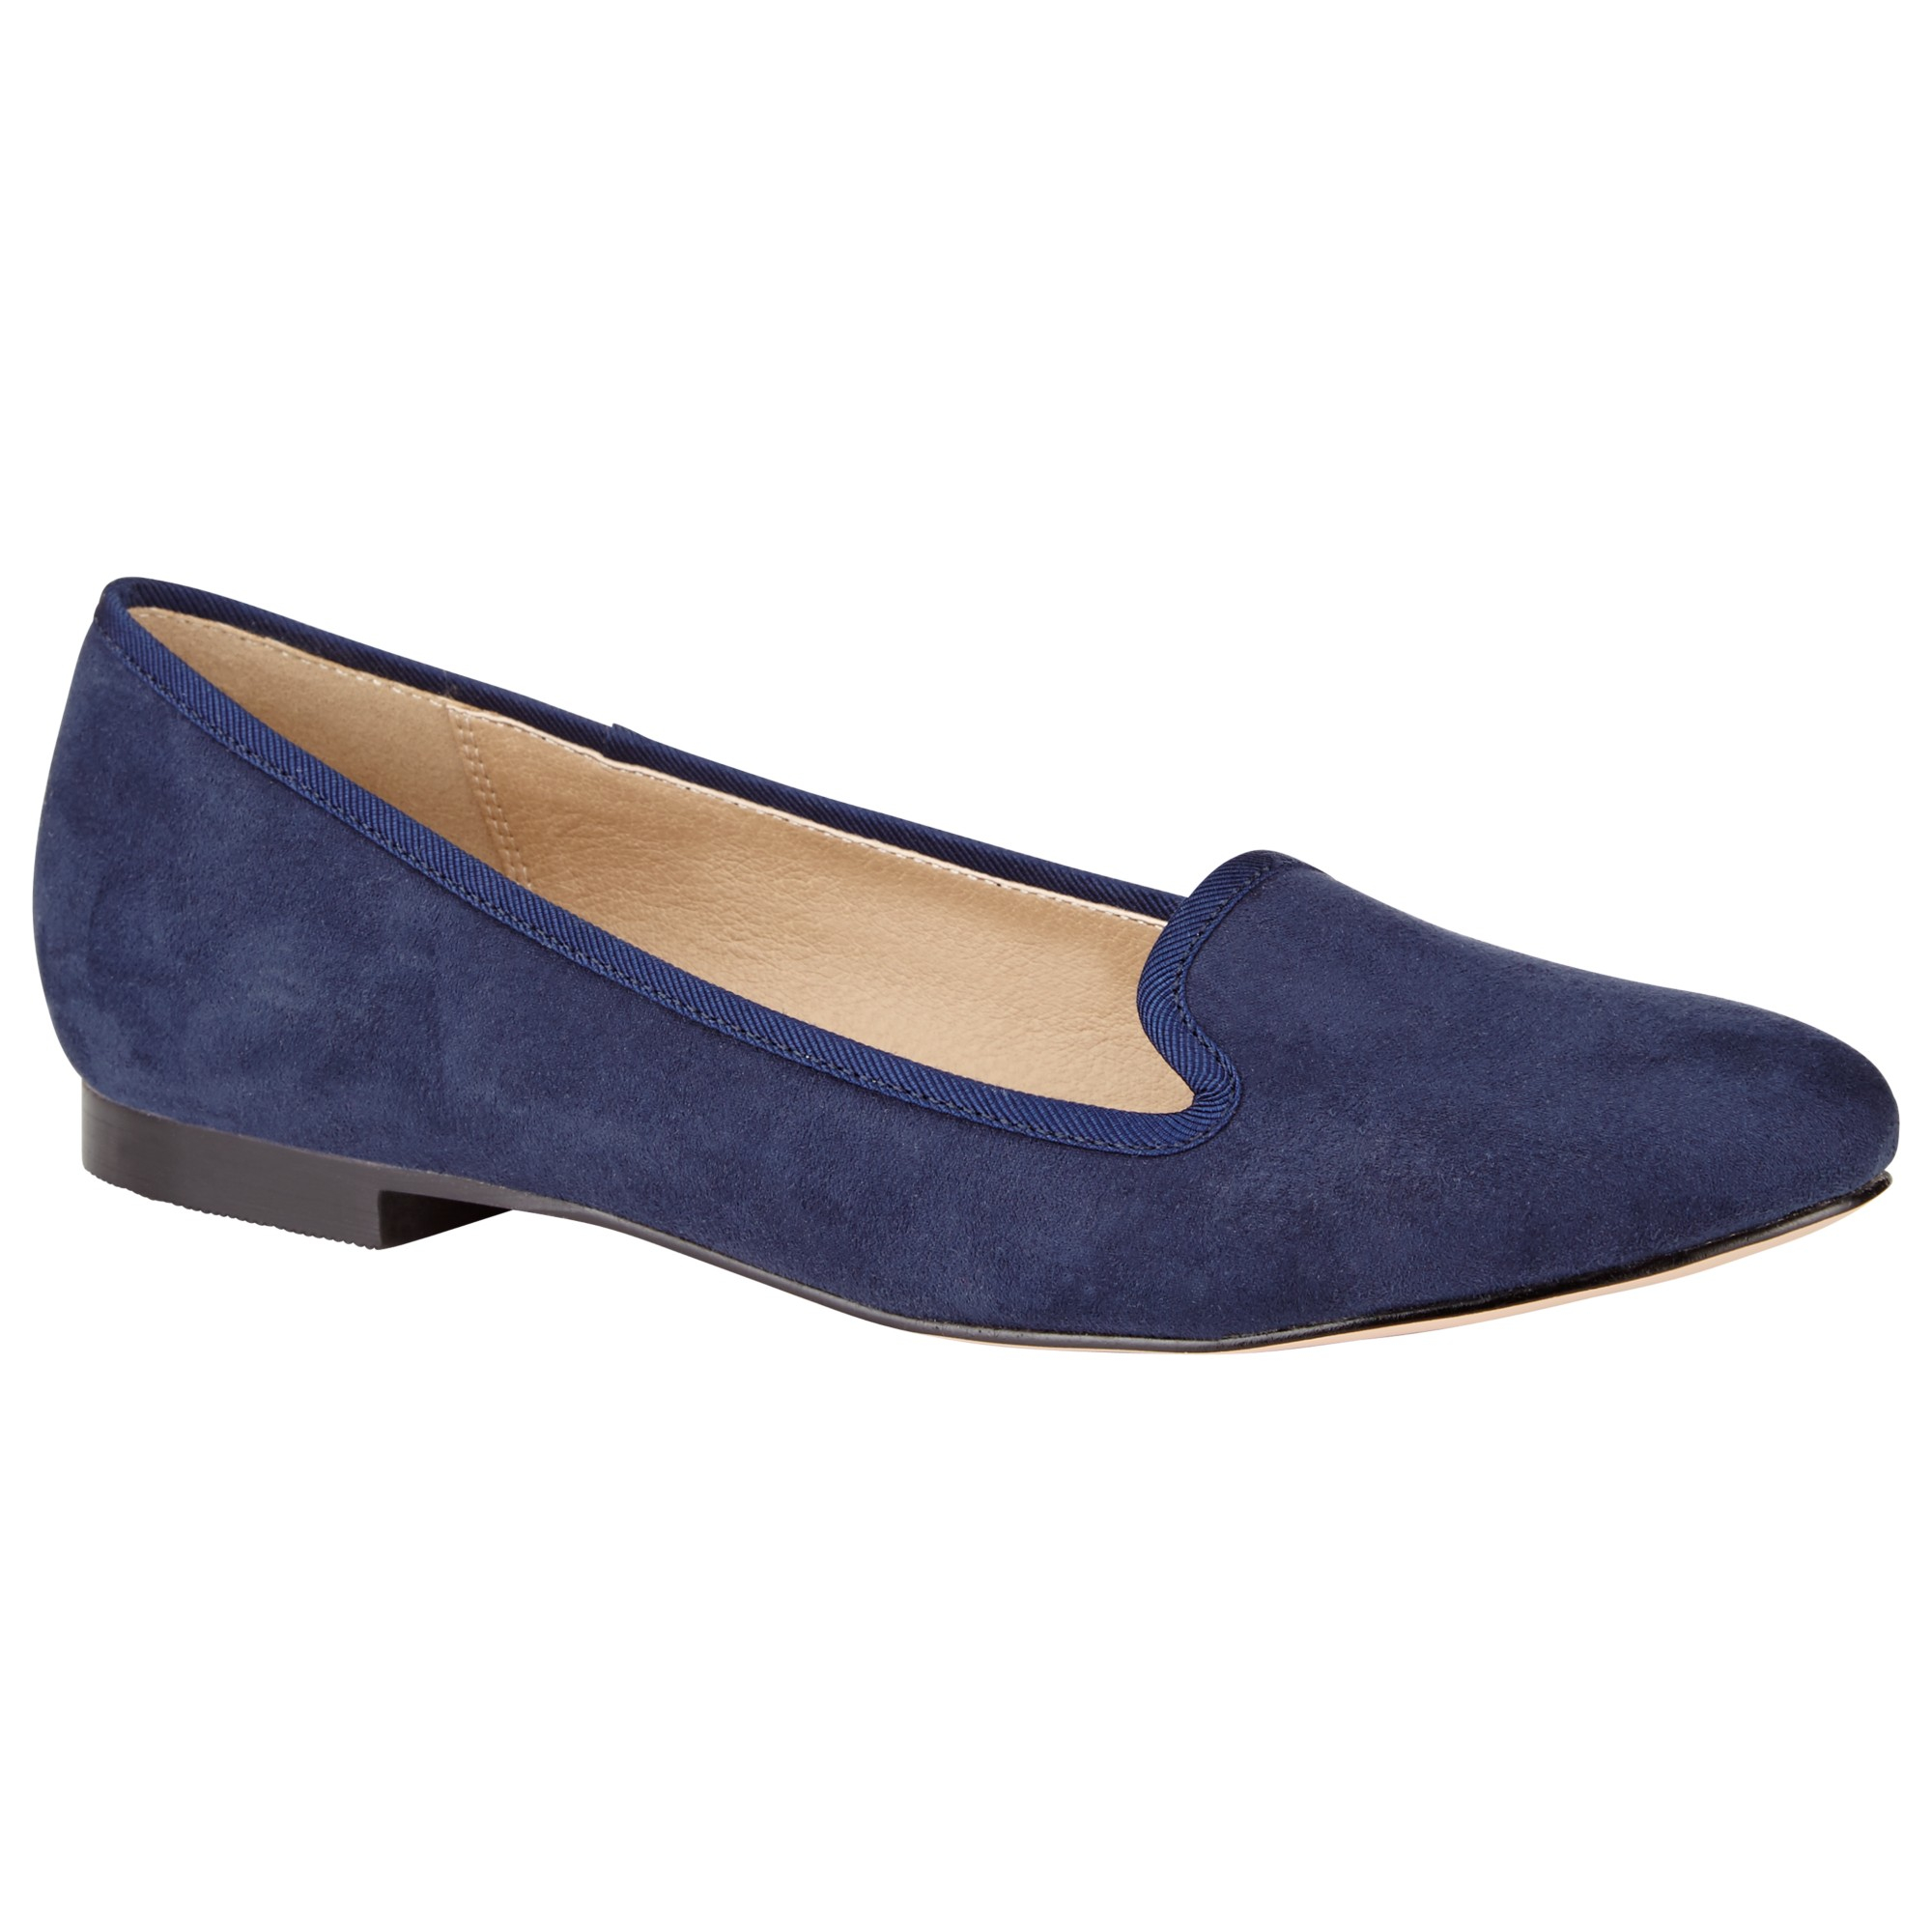 John Lewis Guava Flat Heeled Slip On Loafers in Blue (navy)